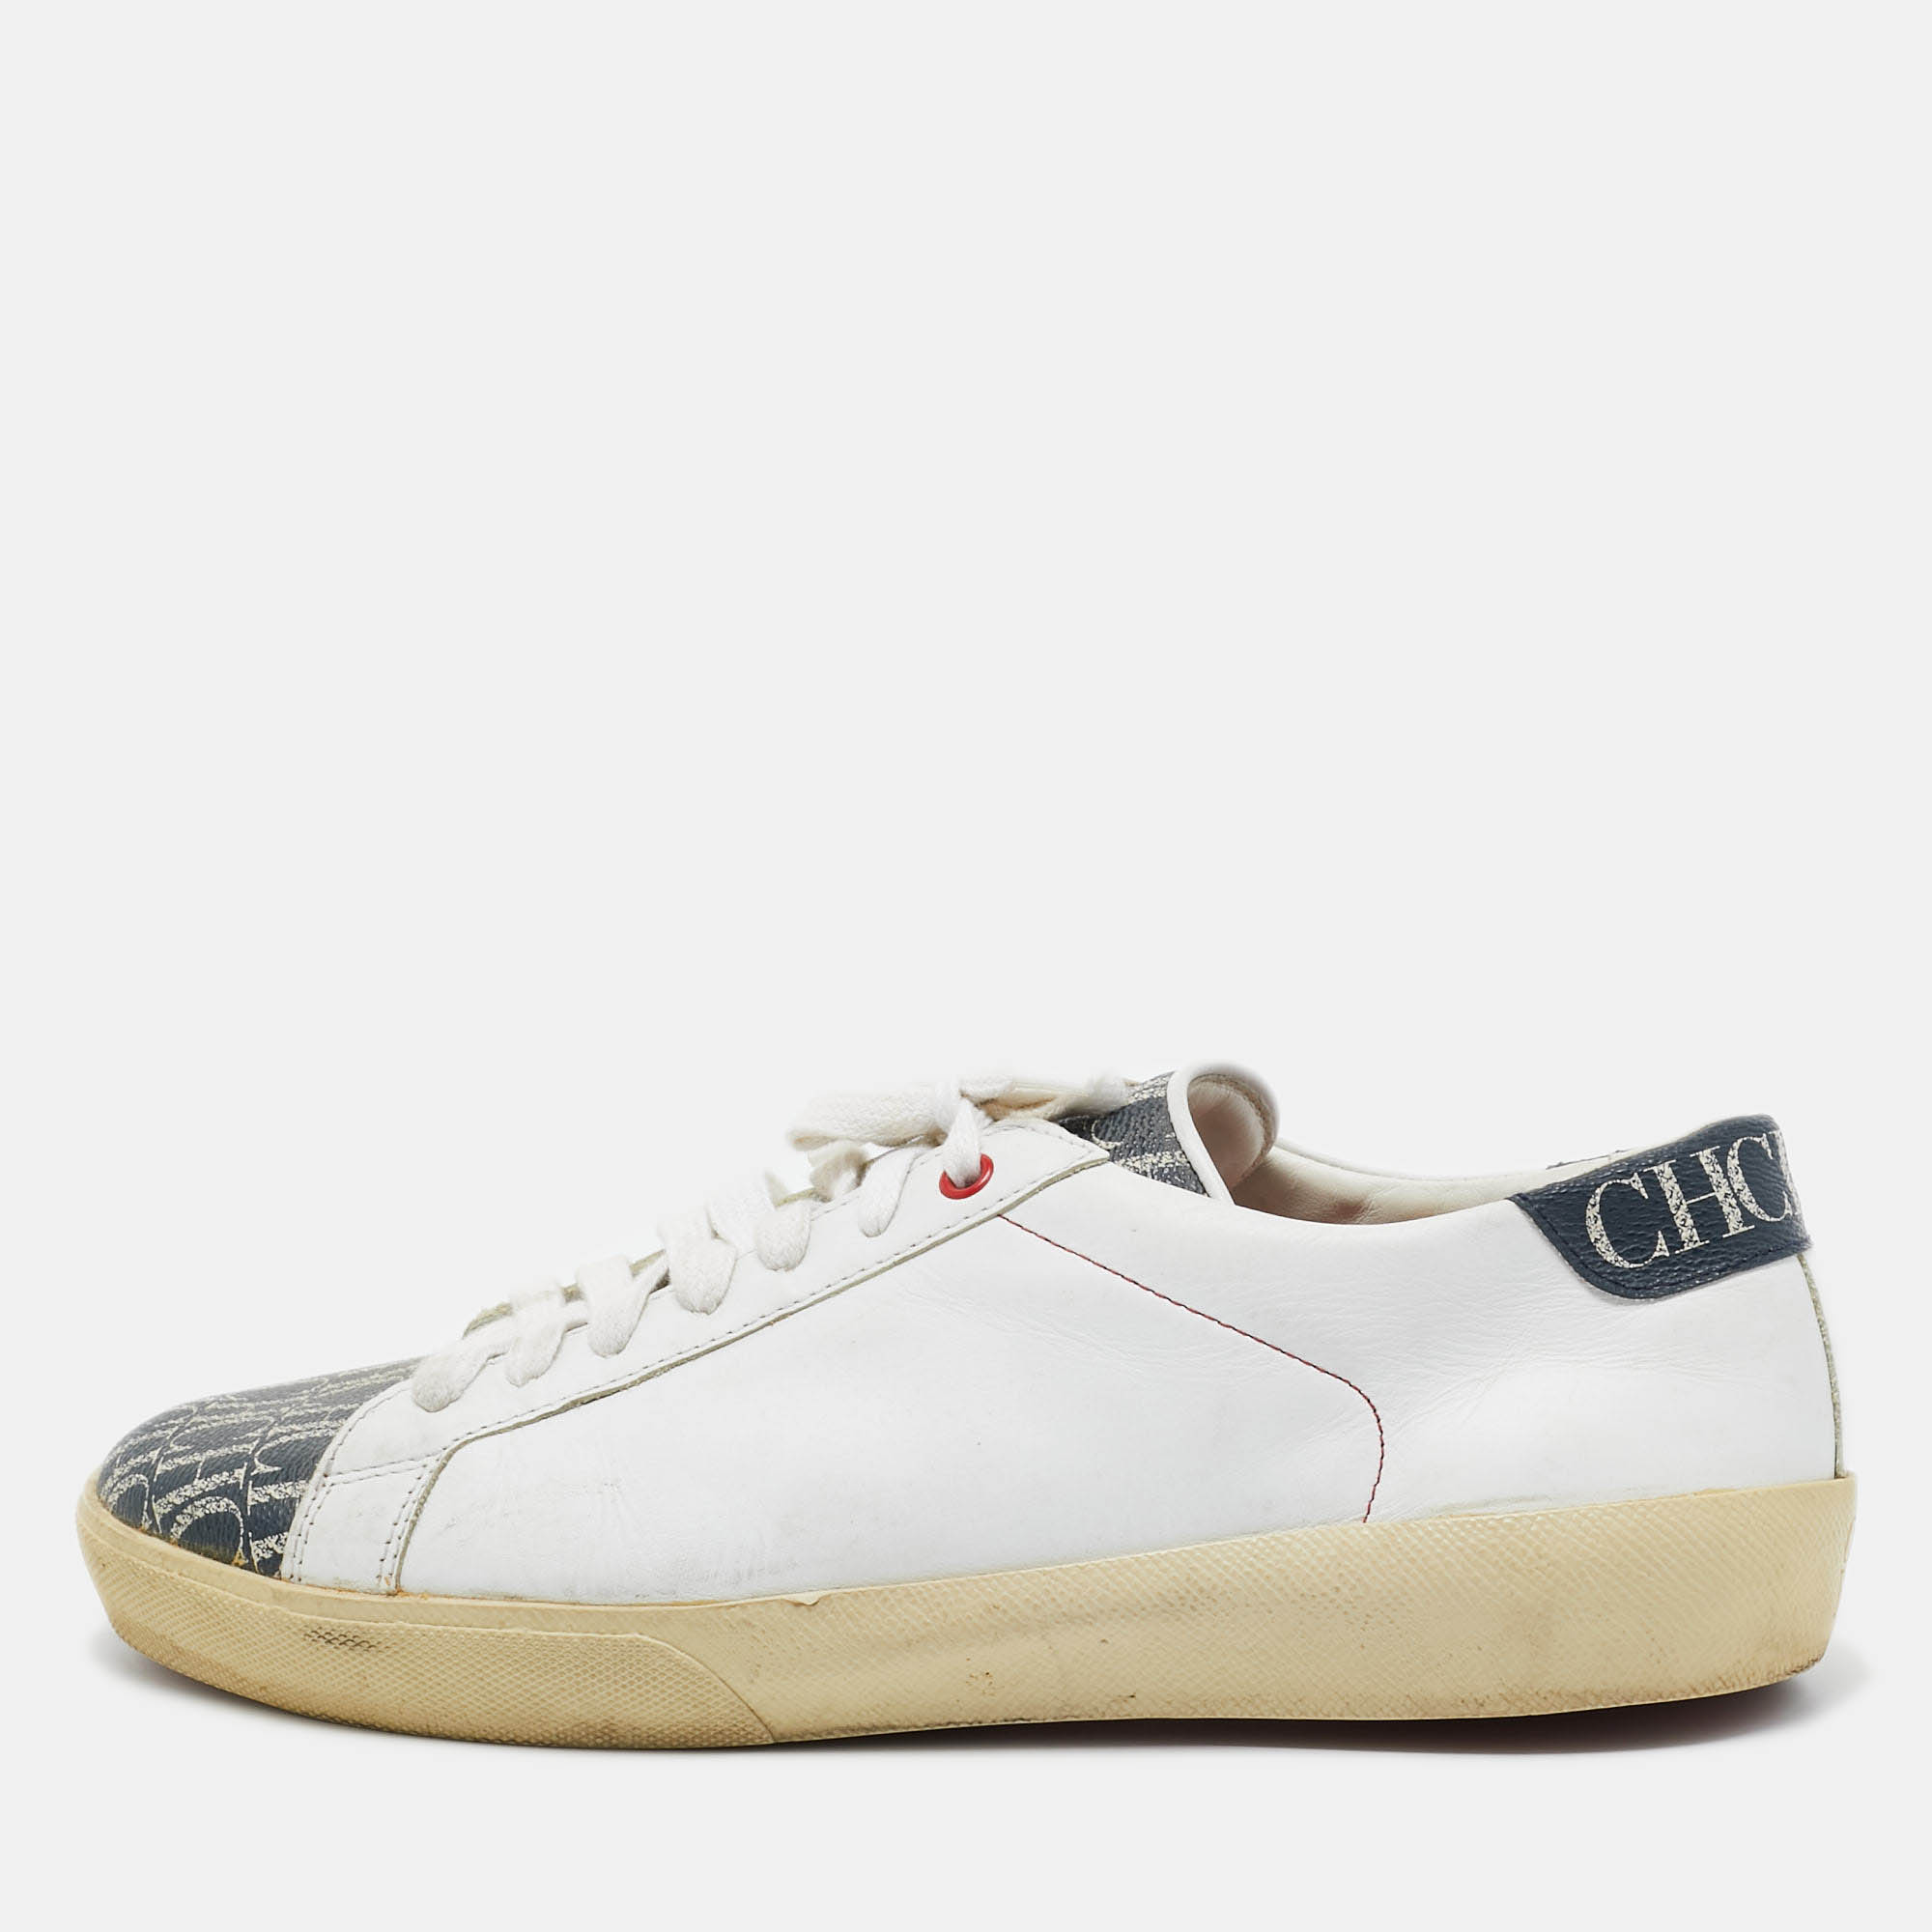 

CH Carolina Herrera White/Beige Leather and Canvas Low Top Sneakers Size 43.5